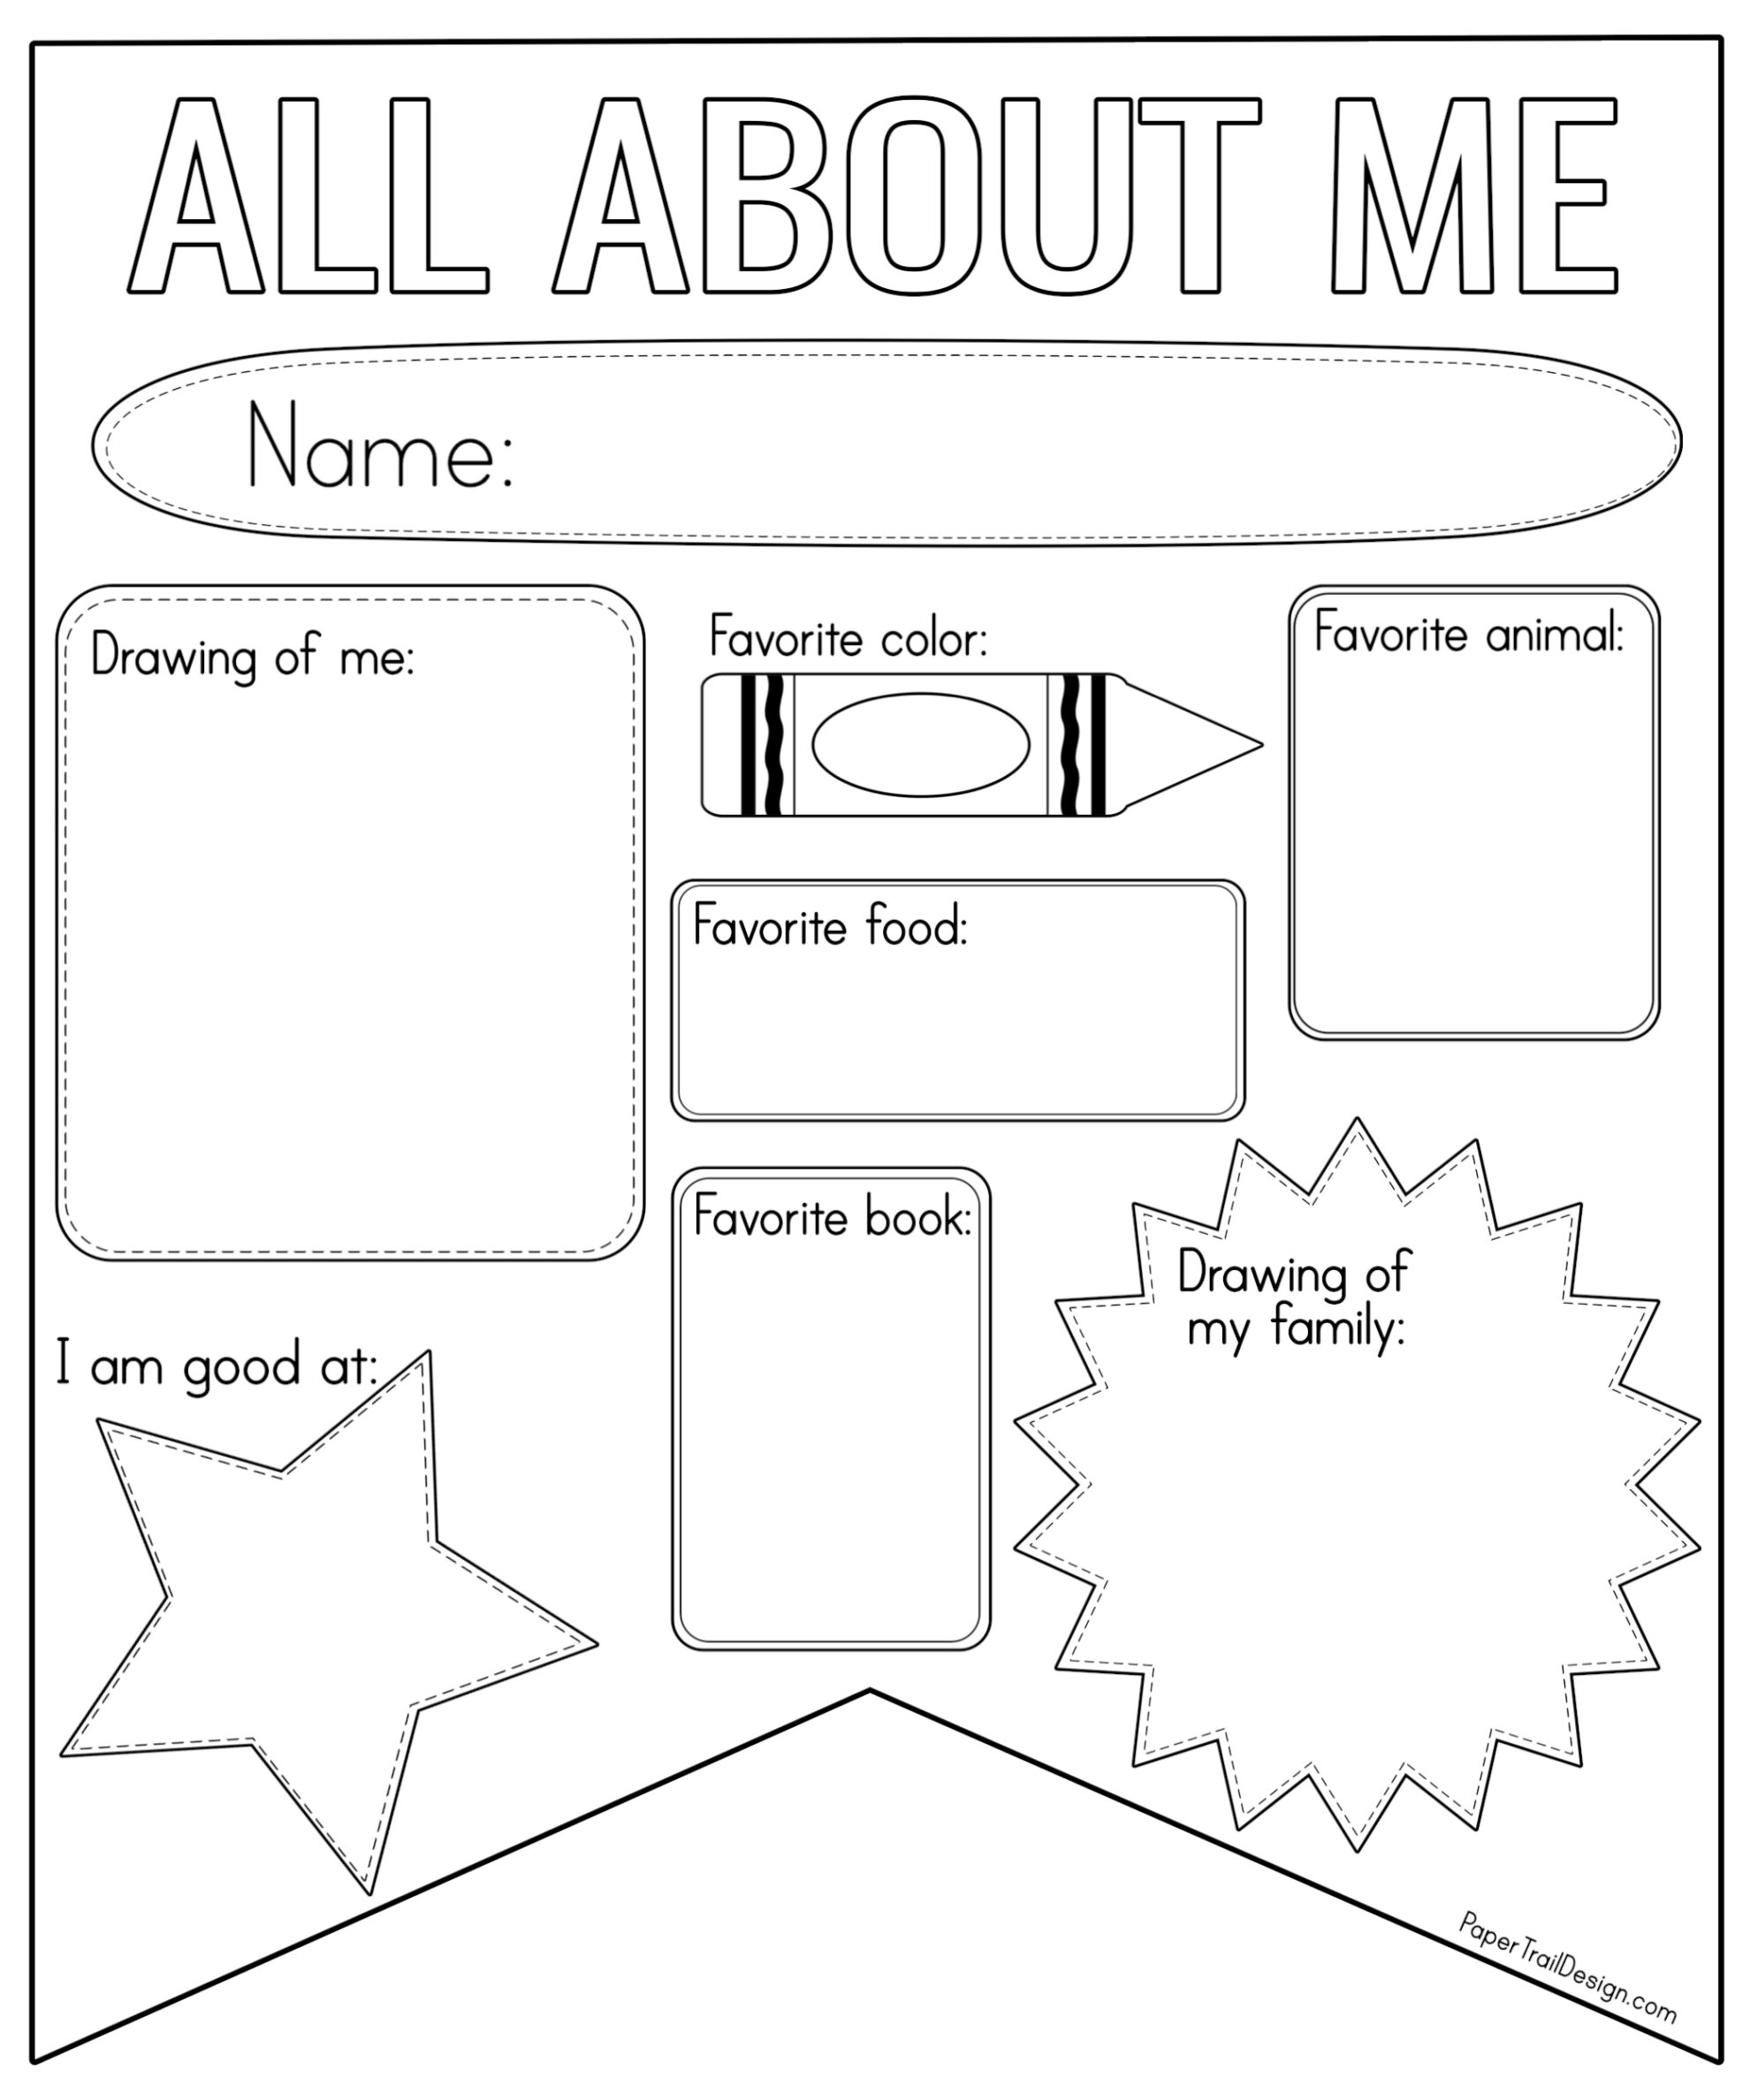 all-about-me-paper-free-printable-get-what-you-need-for-free